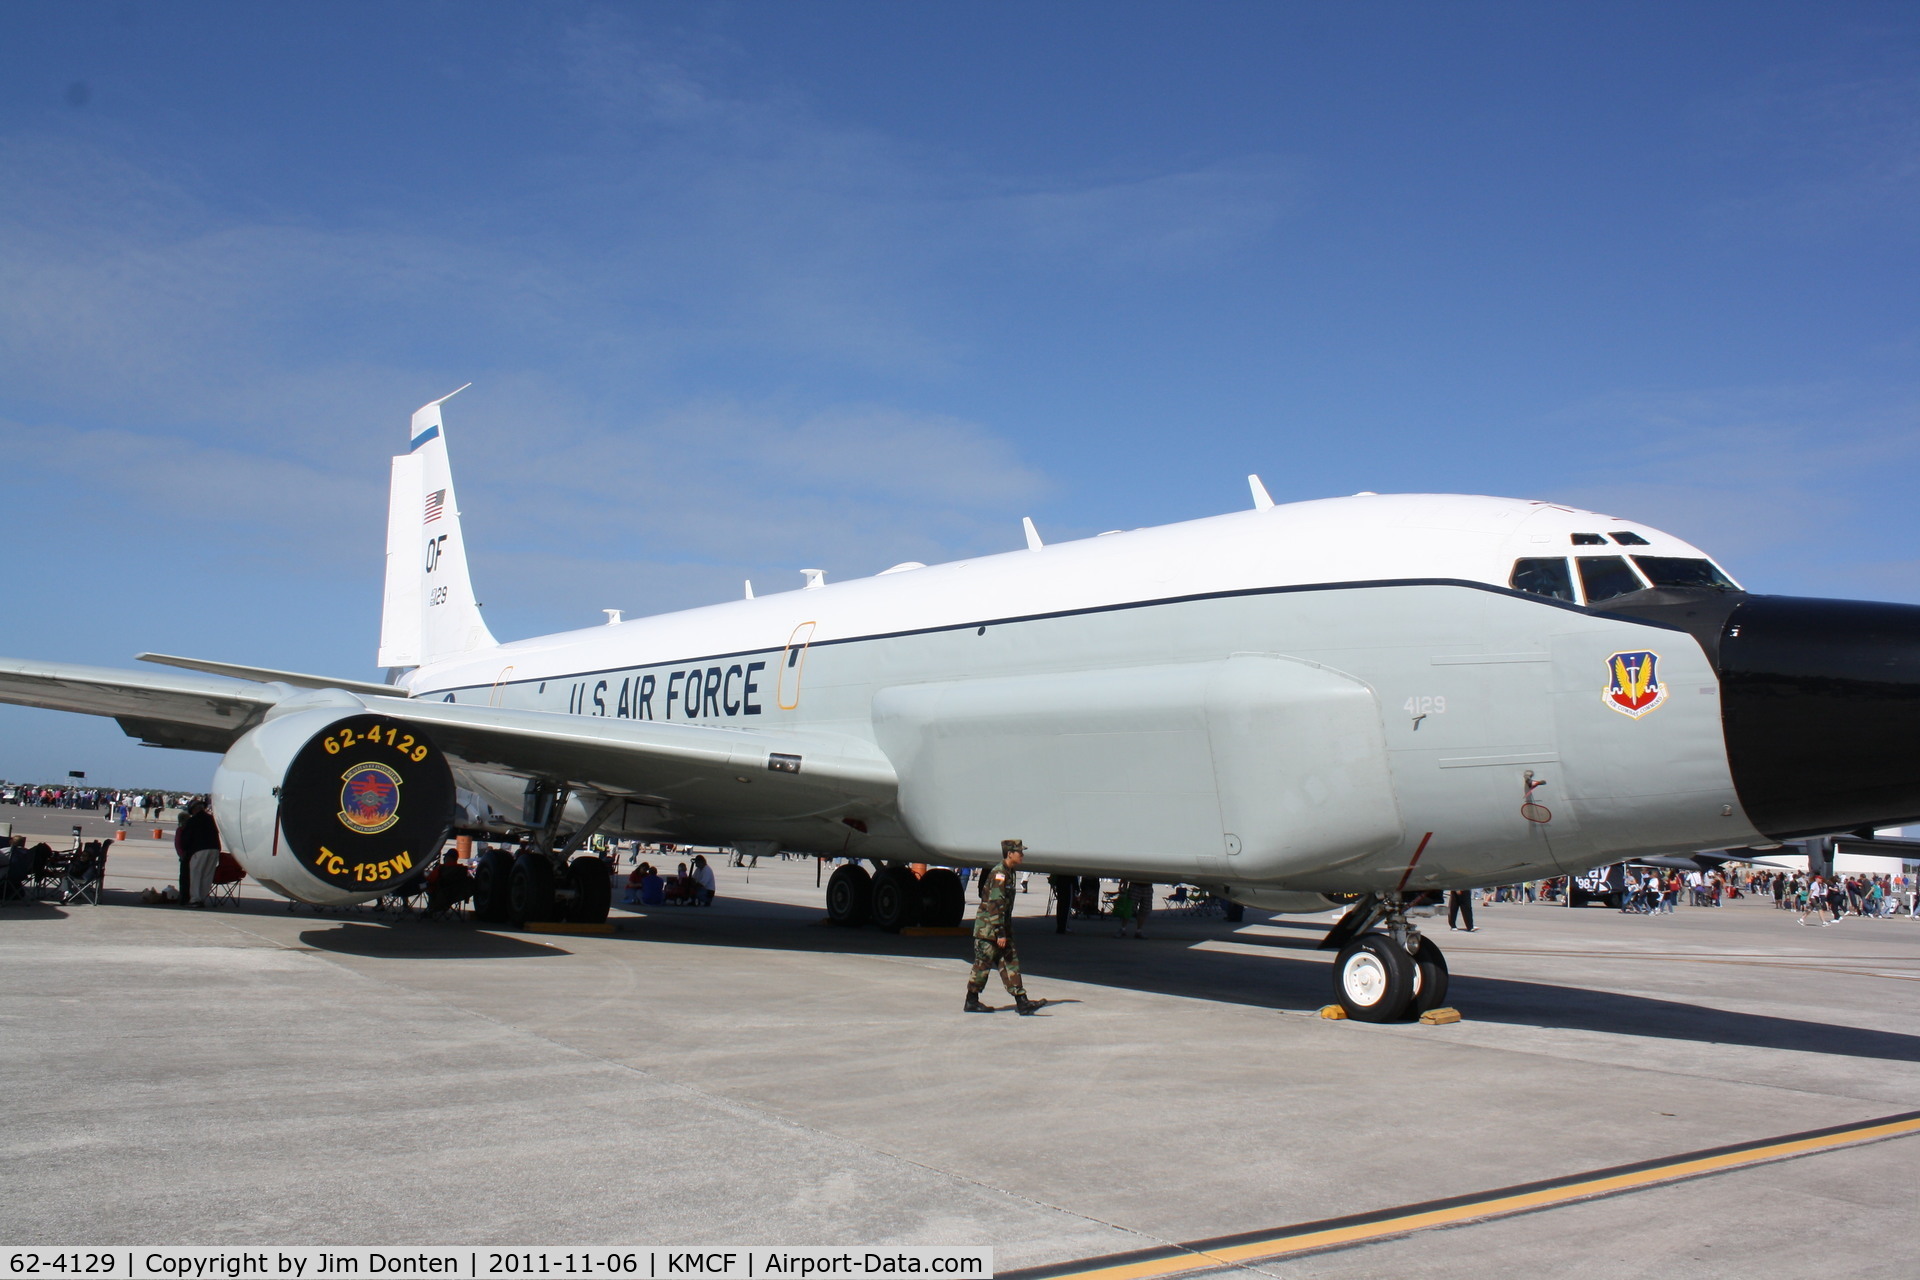 62-4129, 1962 Boeing TC-135W Stratolifter C/N 18469, TC-135W Stratolifter (62-4129) of the 38th Reconnaissance Squadron at Offutt Air Force Base on display at MacDill Air Fest